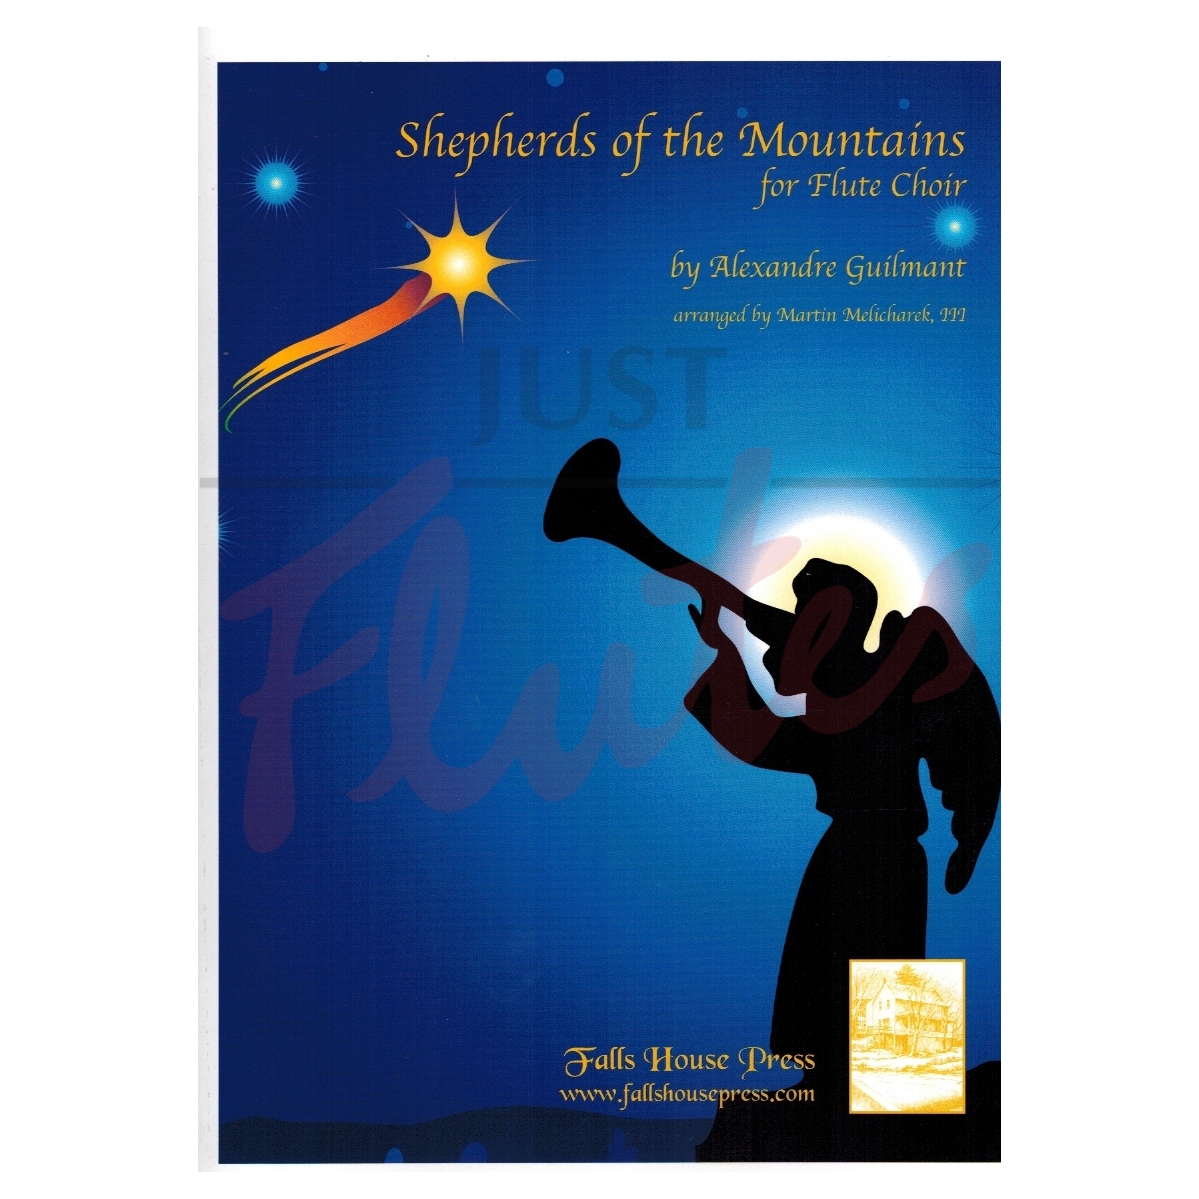 Shepherds of the Mountains arranged for Flute Choir